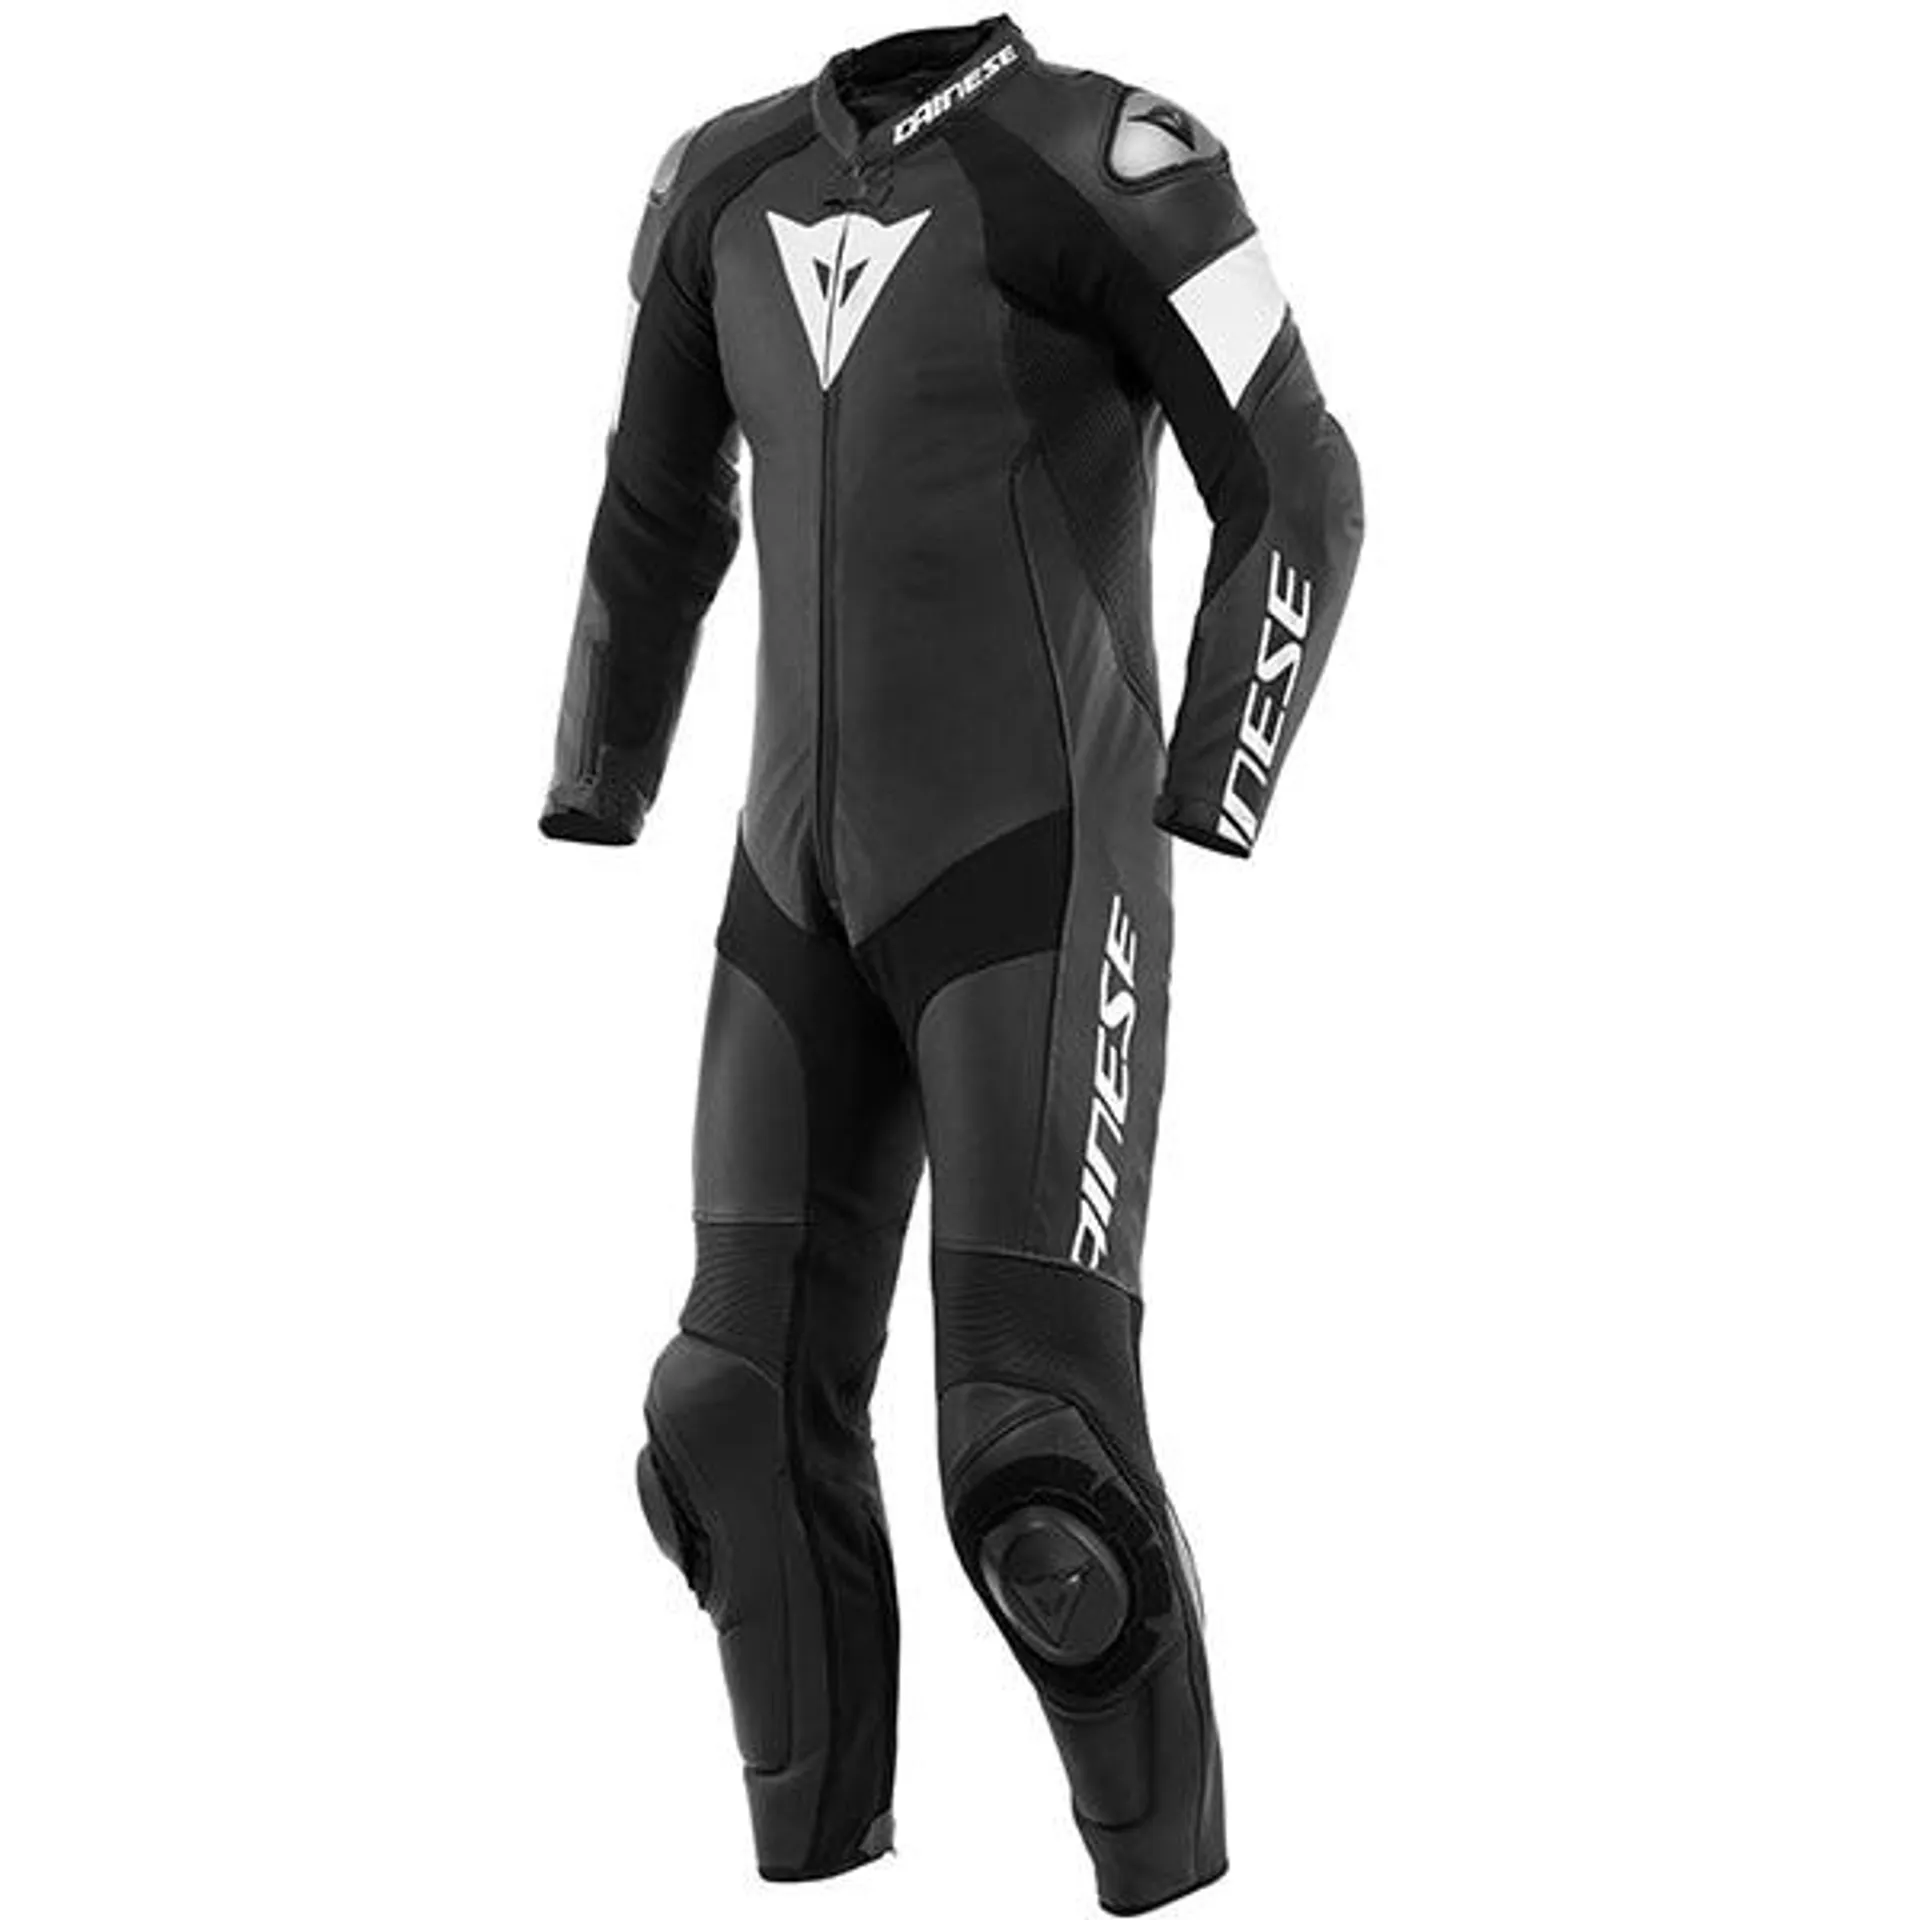 Dainese Tosa Perforated 1 Piece Leather Suit - Black / Black / White